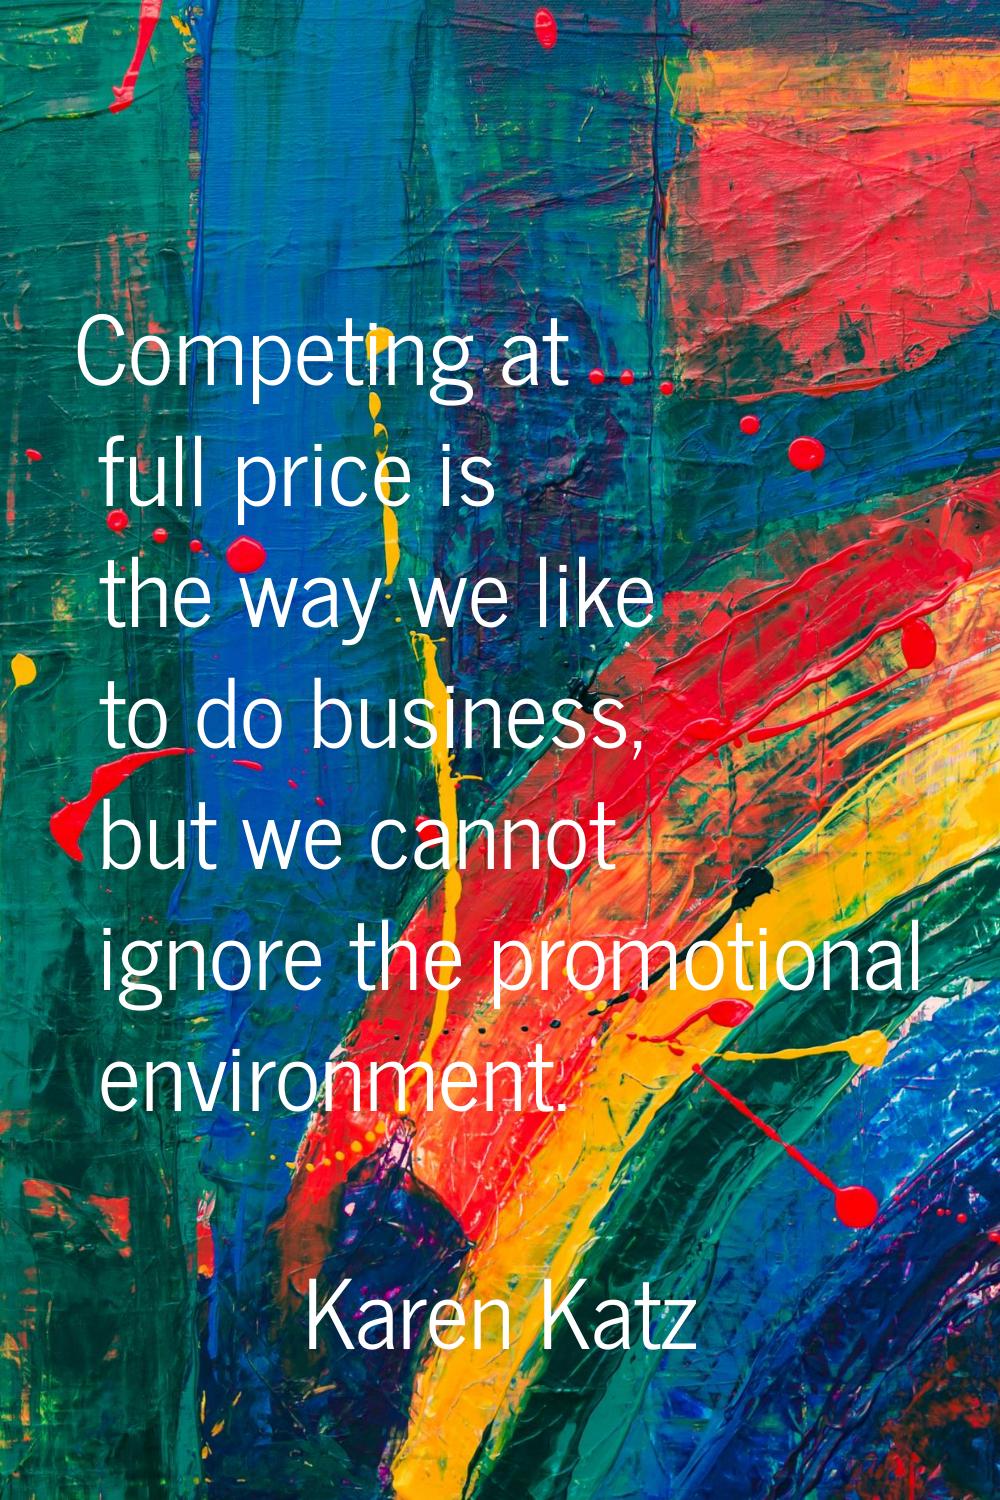 Competing at full price is the way we like to do business, but we cannot ignore the promotional env